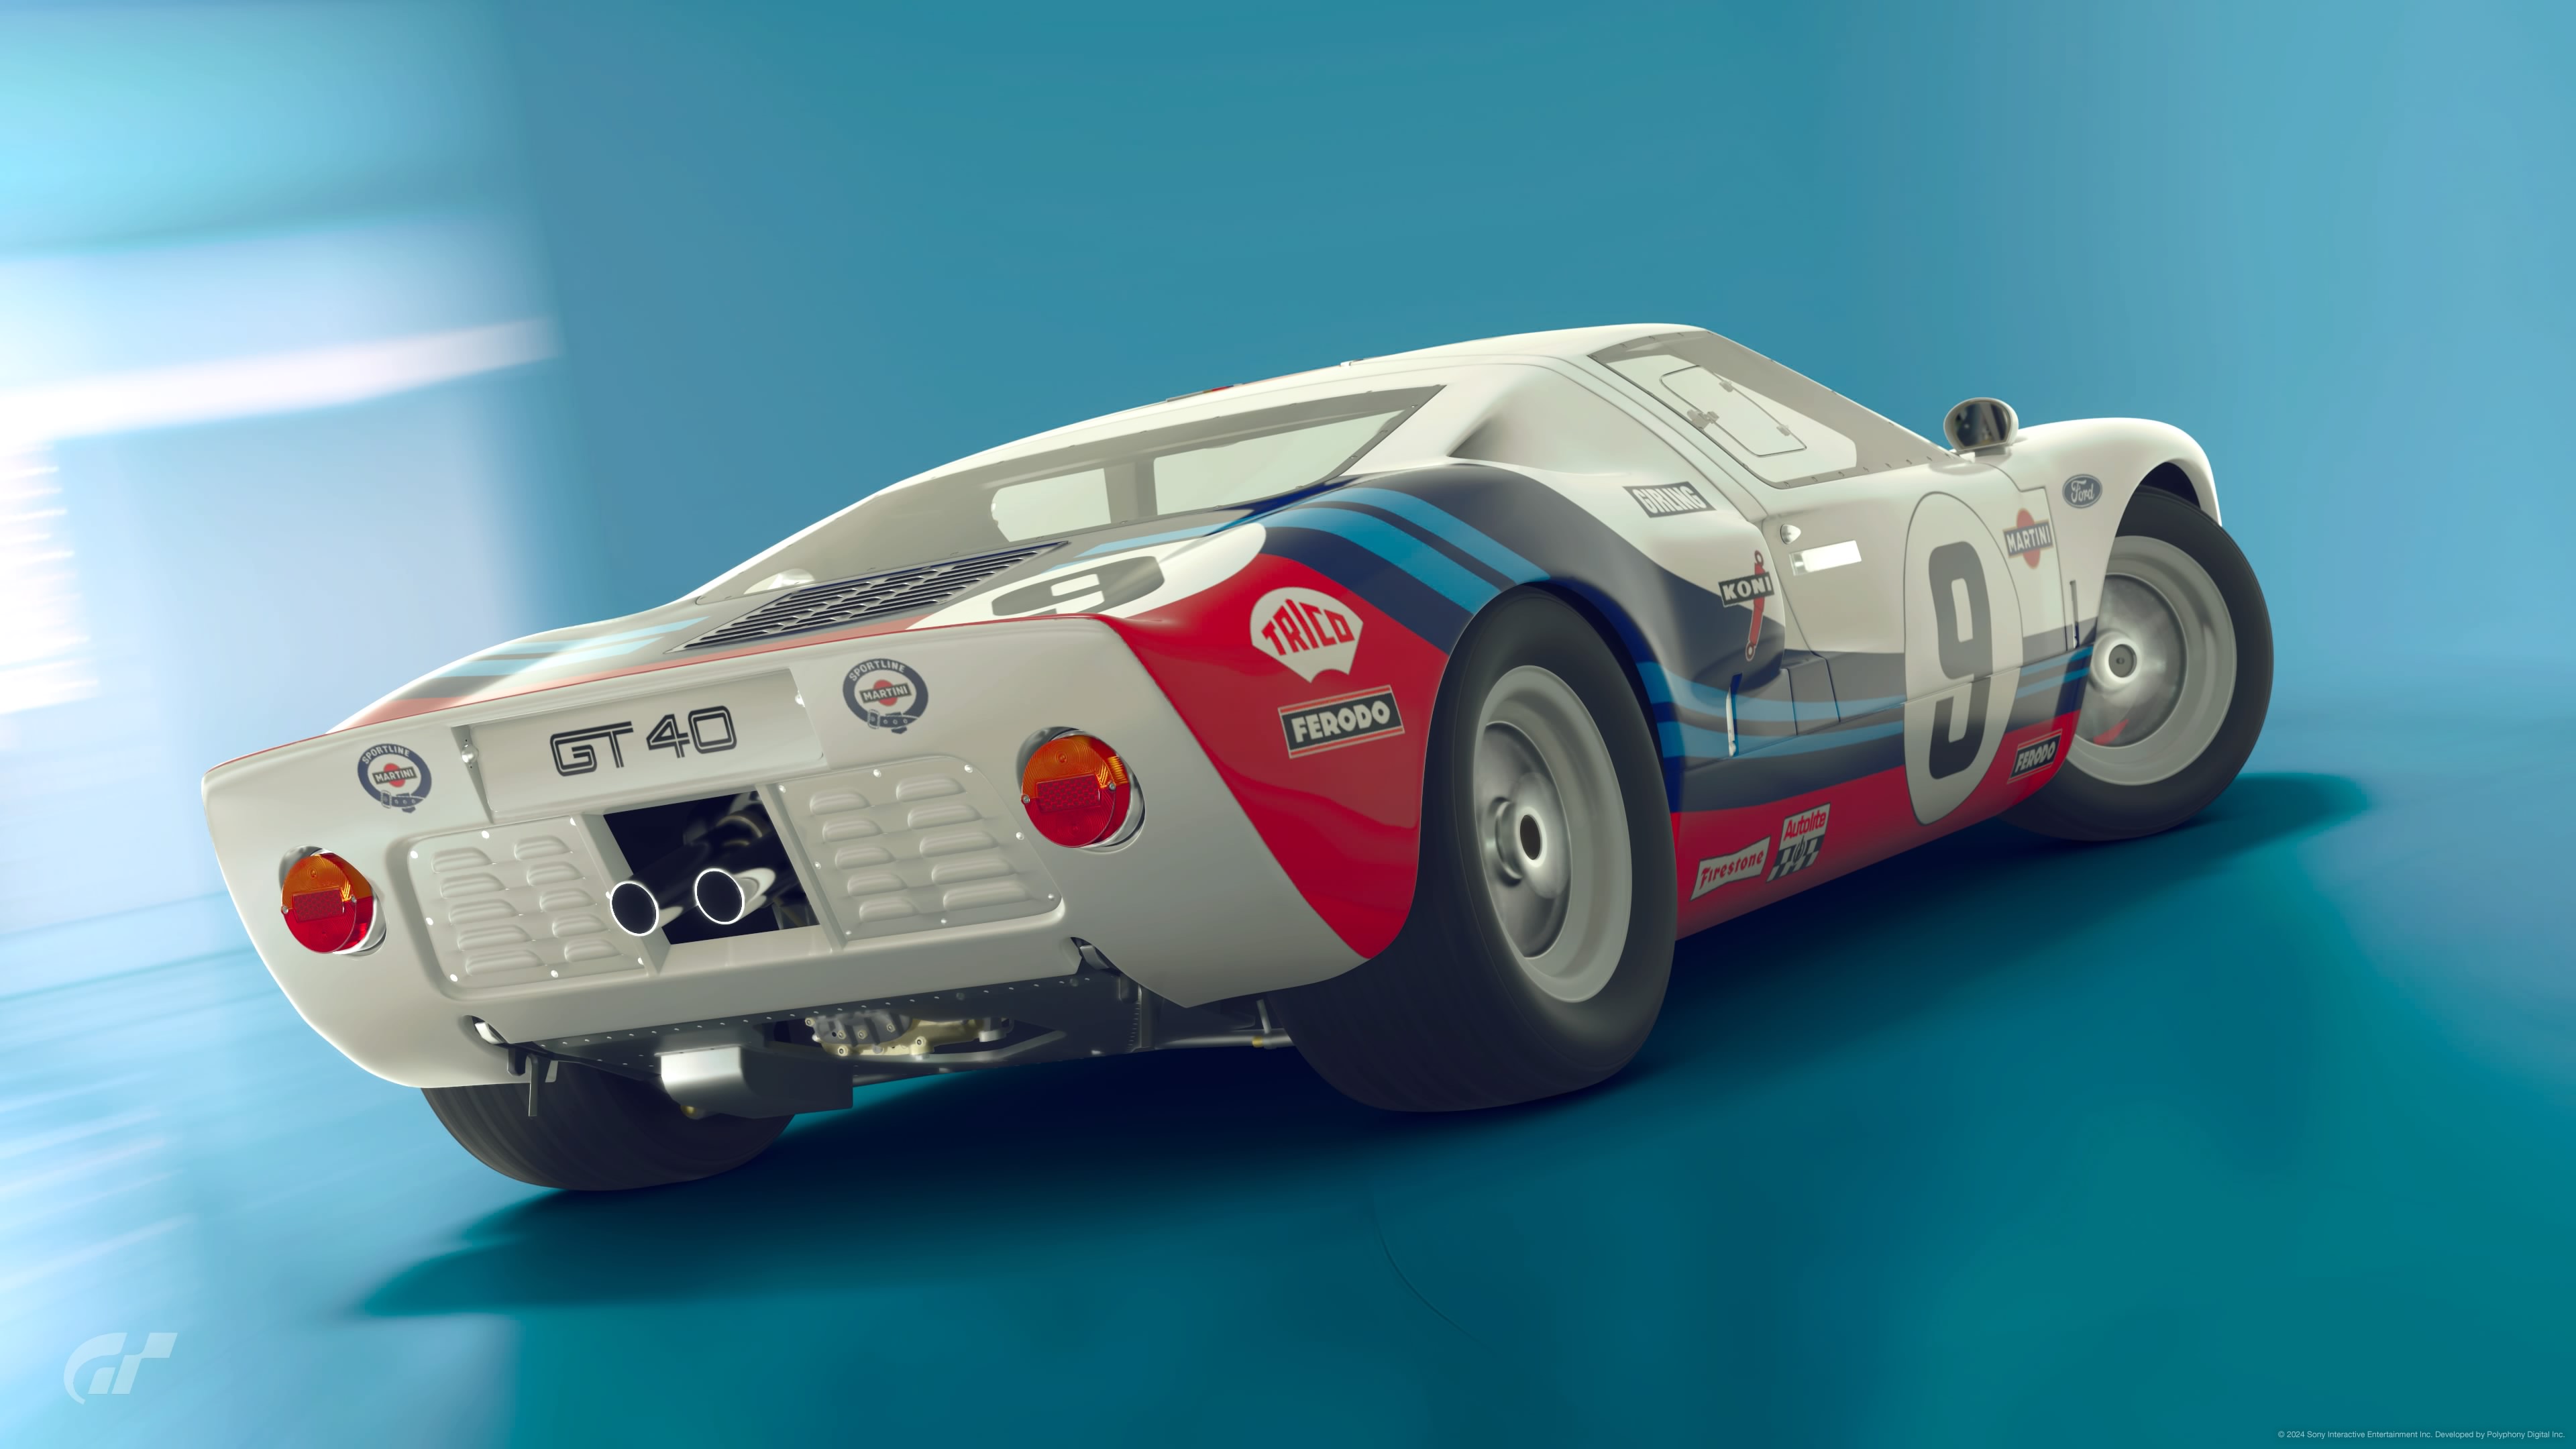 Ford GT40 American Cars Custom Gran Turismo 7 Livery Martini Le Mans Video Games Rear View 1966 Year 3840x2160